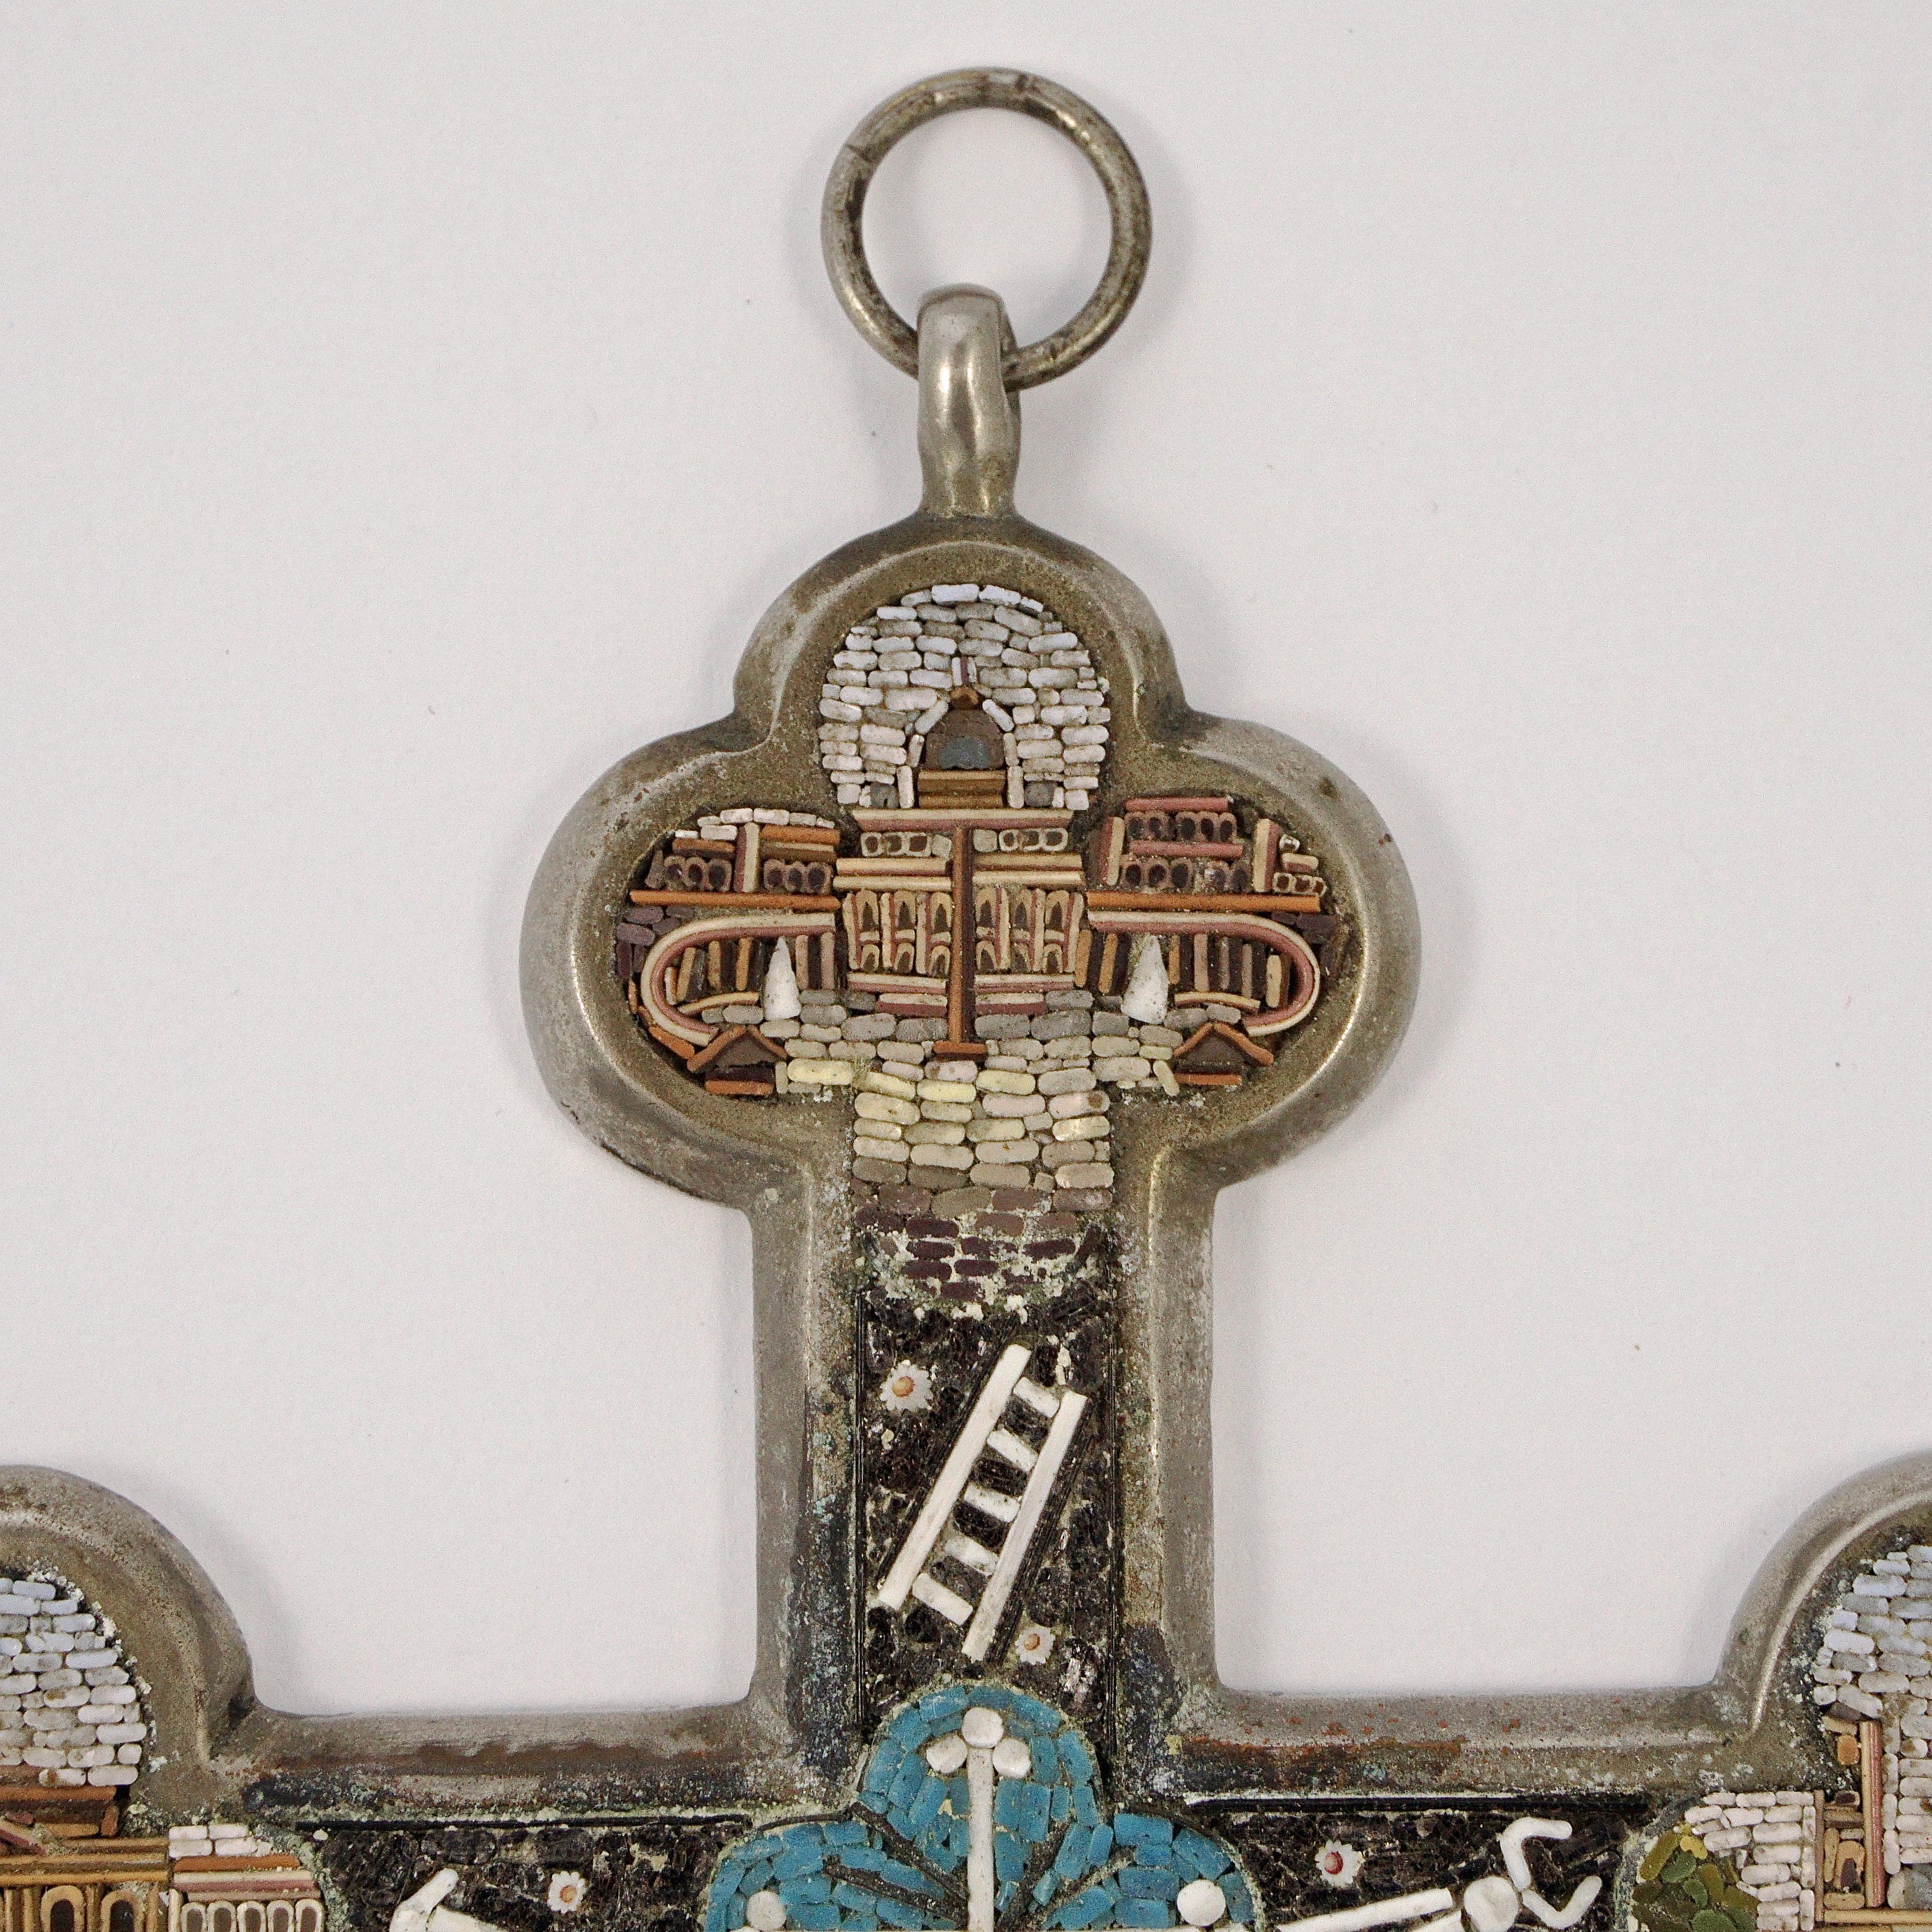 Fabulous large Grand Tour wall hanging silver tone crucifix, set with micro mosaics depicting iconic scenes of Rome. The detailed body of Christ is done in gold tone metal, and the reverse is shiny silver tone. Measuring length 17.5cm / 6.88 inches